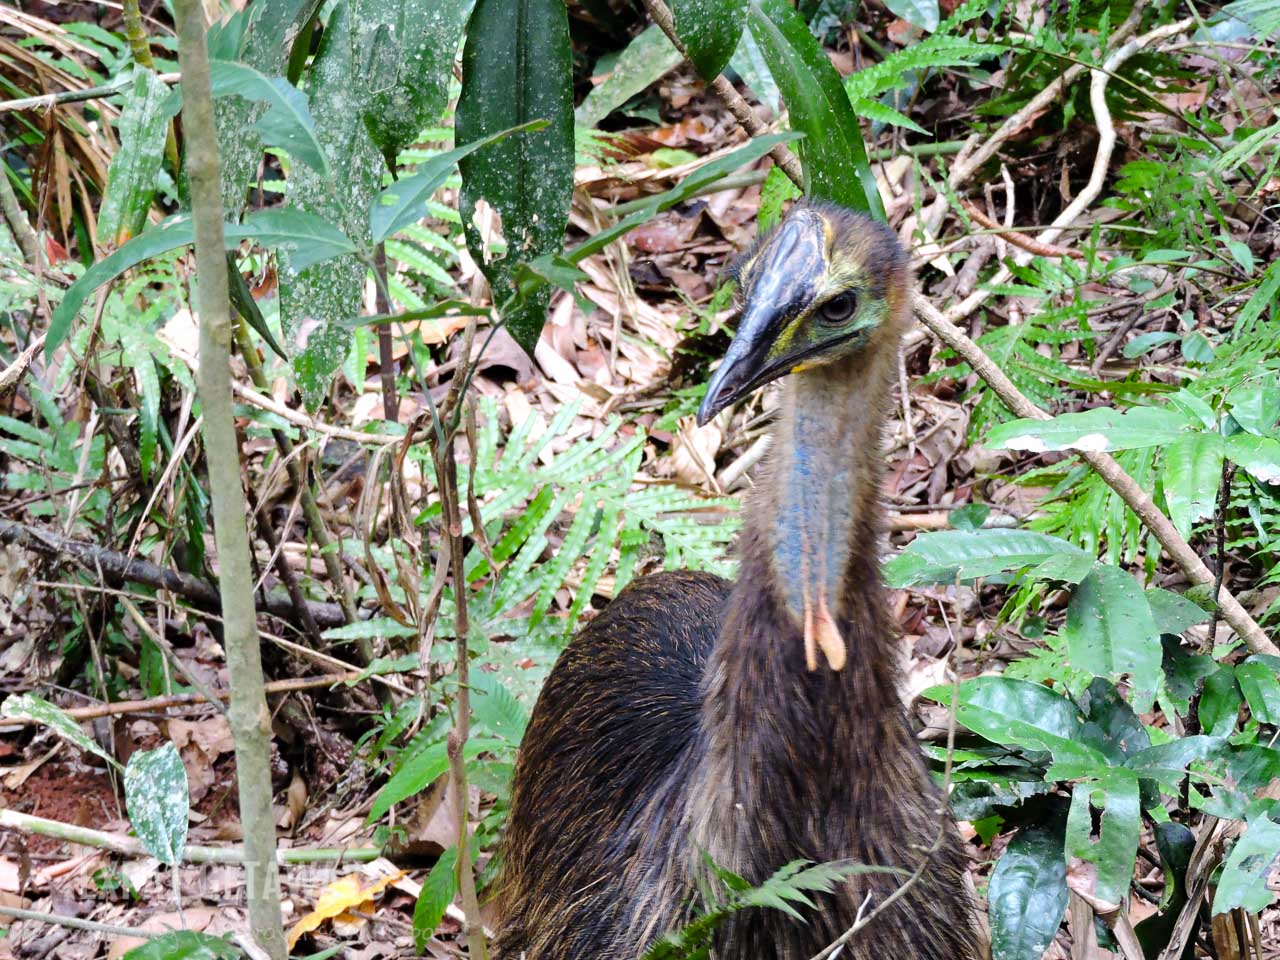 A juvenile cassowary spotted on the Jindalba Boardwalk in the Daintree Rainforest.